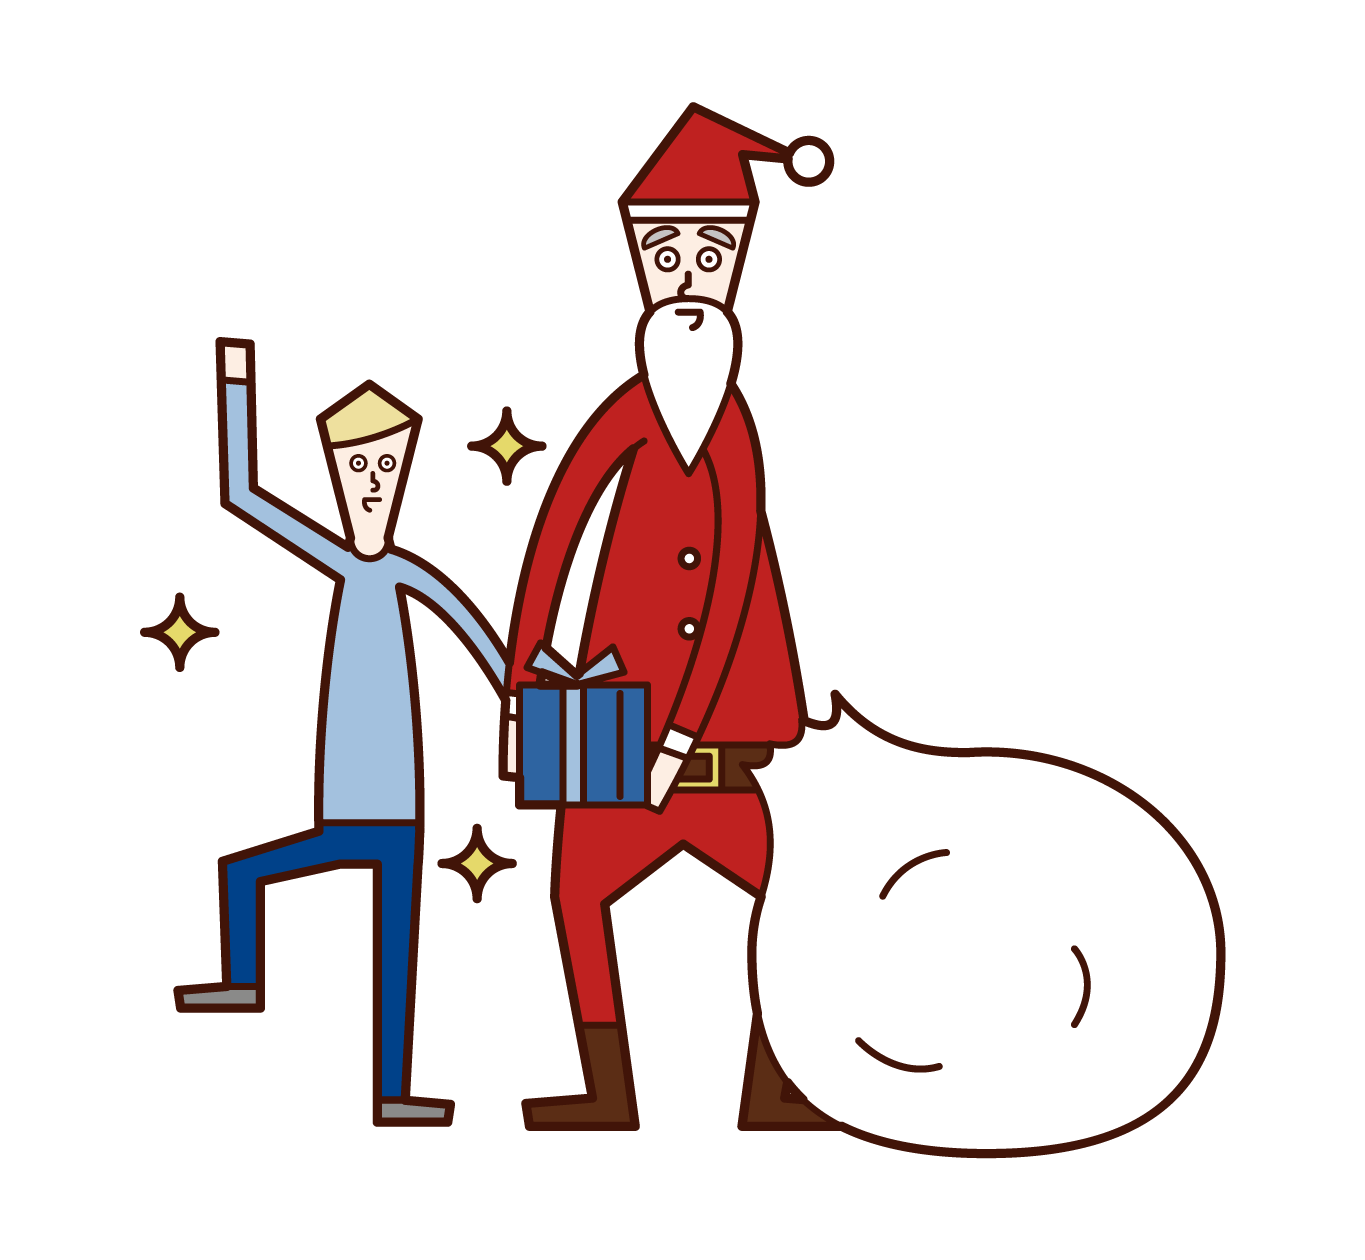 Illustration of Santa Claus giving presents to children